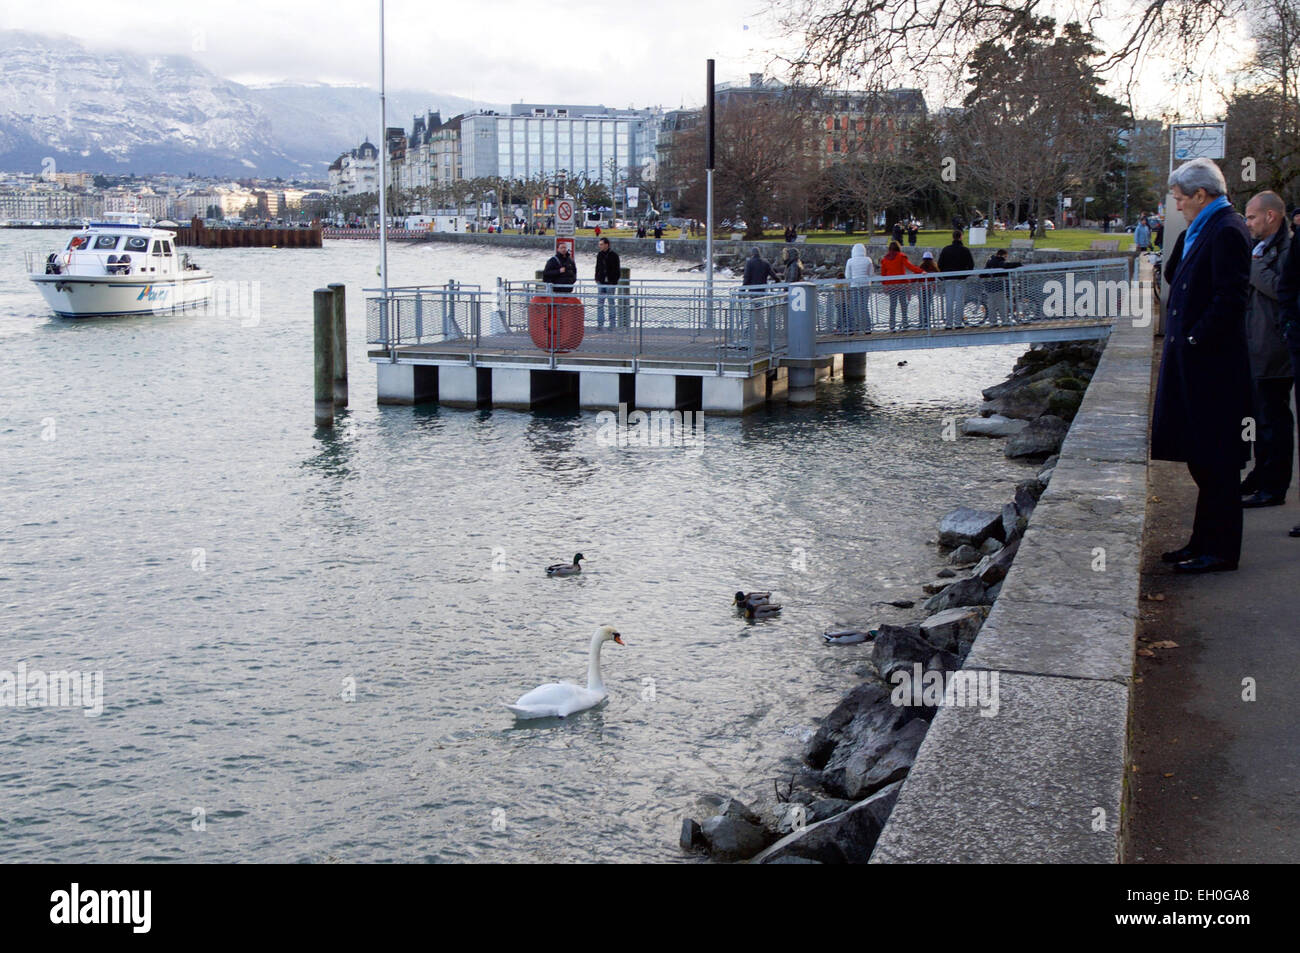 U.S. Secretary of State John Kerry admires a swan in Lake Geneva in Geneva, Switzerland, on February 22, 2015, while taking a walk before a round of talks with Iranian officials about the future of their nuclear program. Stock Photo